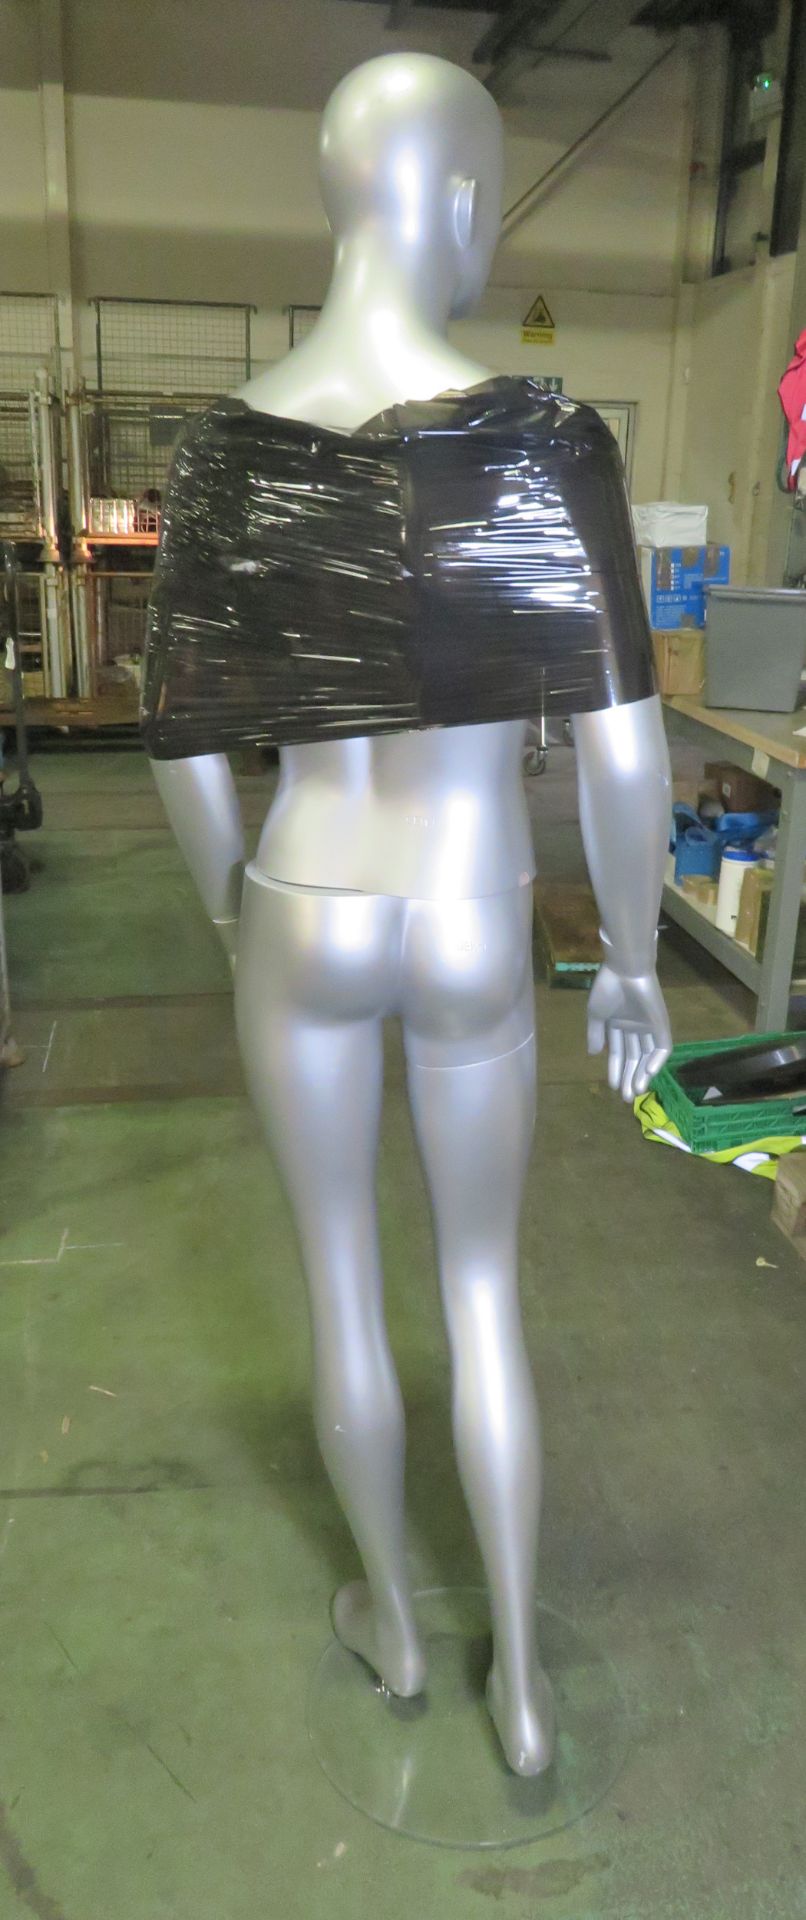 Display mannequin - Female standing - chrome effect - Image 2 of 4